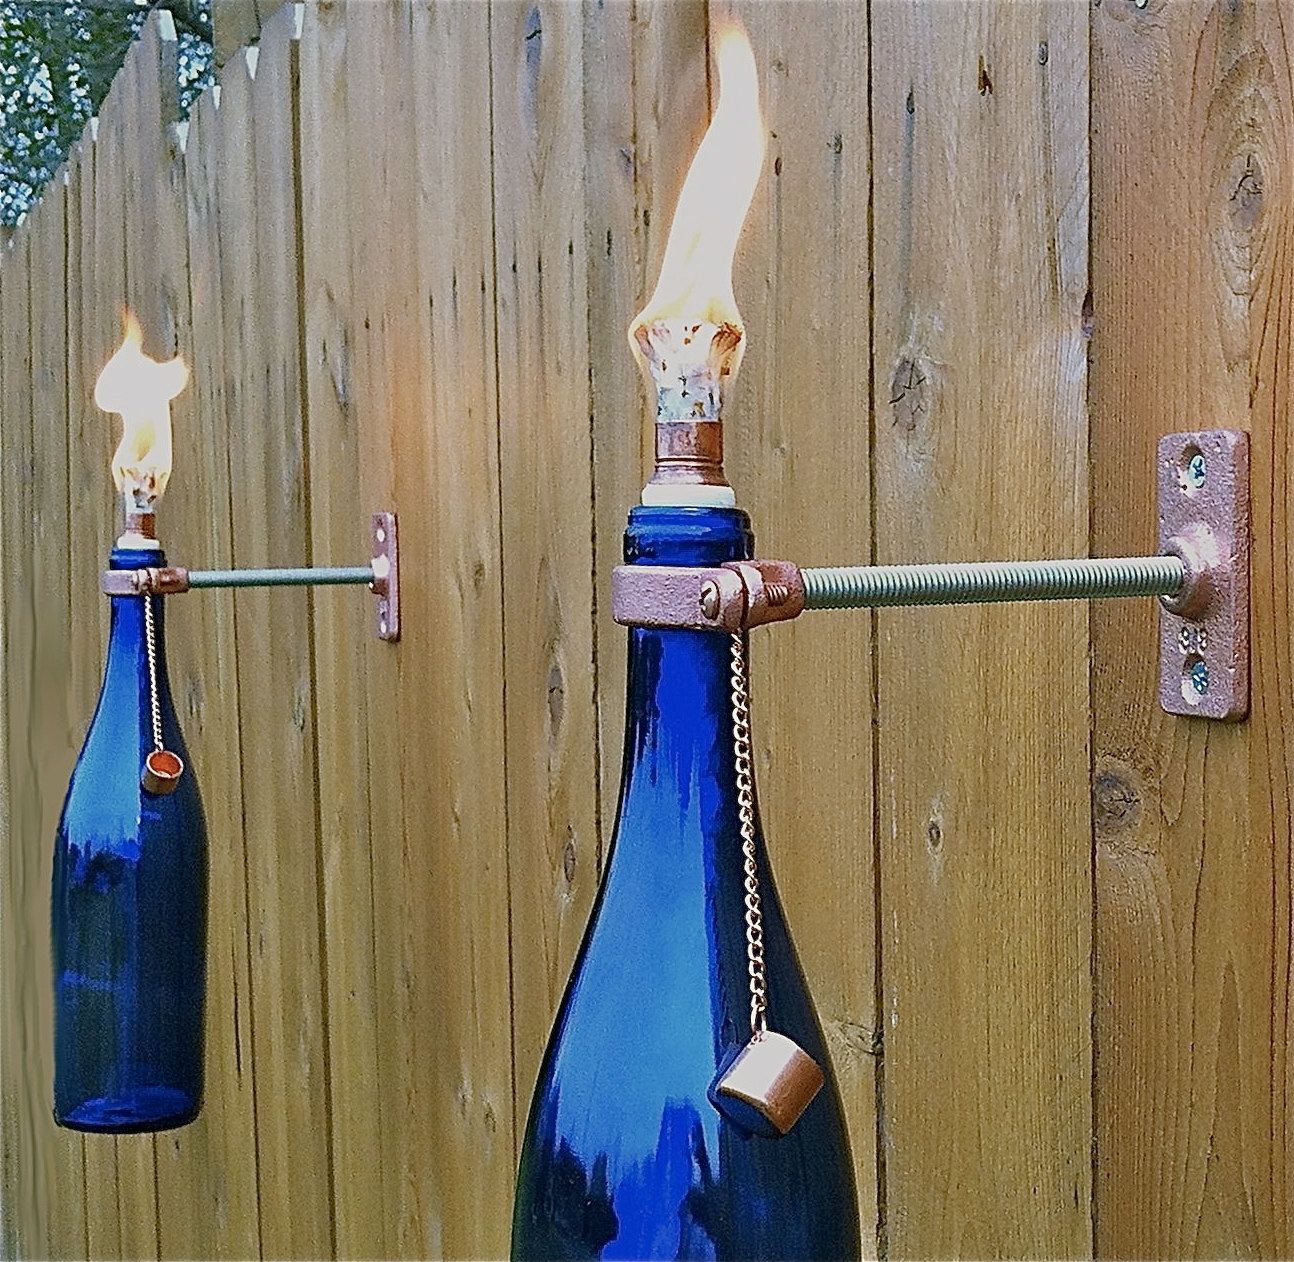 Cobalt Blue Wine Bottle Tiki Torches Will Add Stylish Lighting To For Outdoor Hanging Bottle Lights (View 15 of 15)